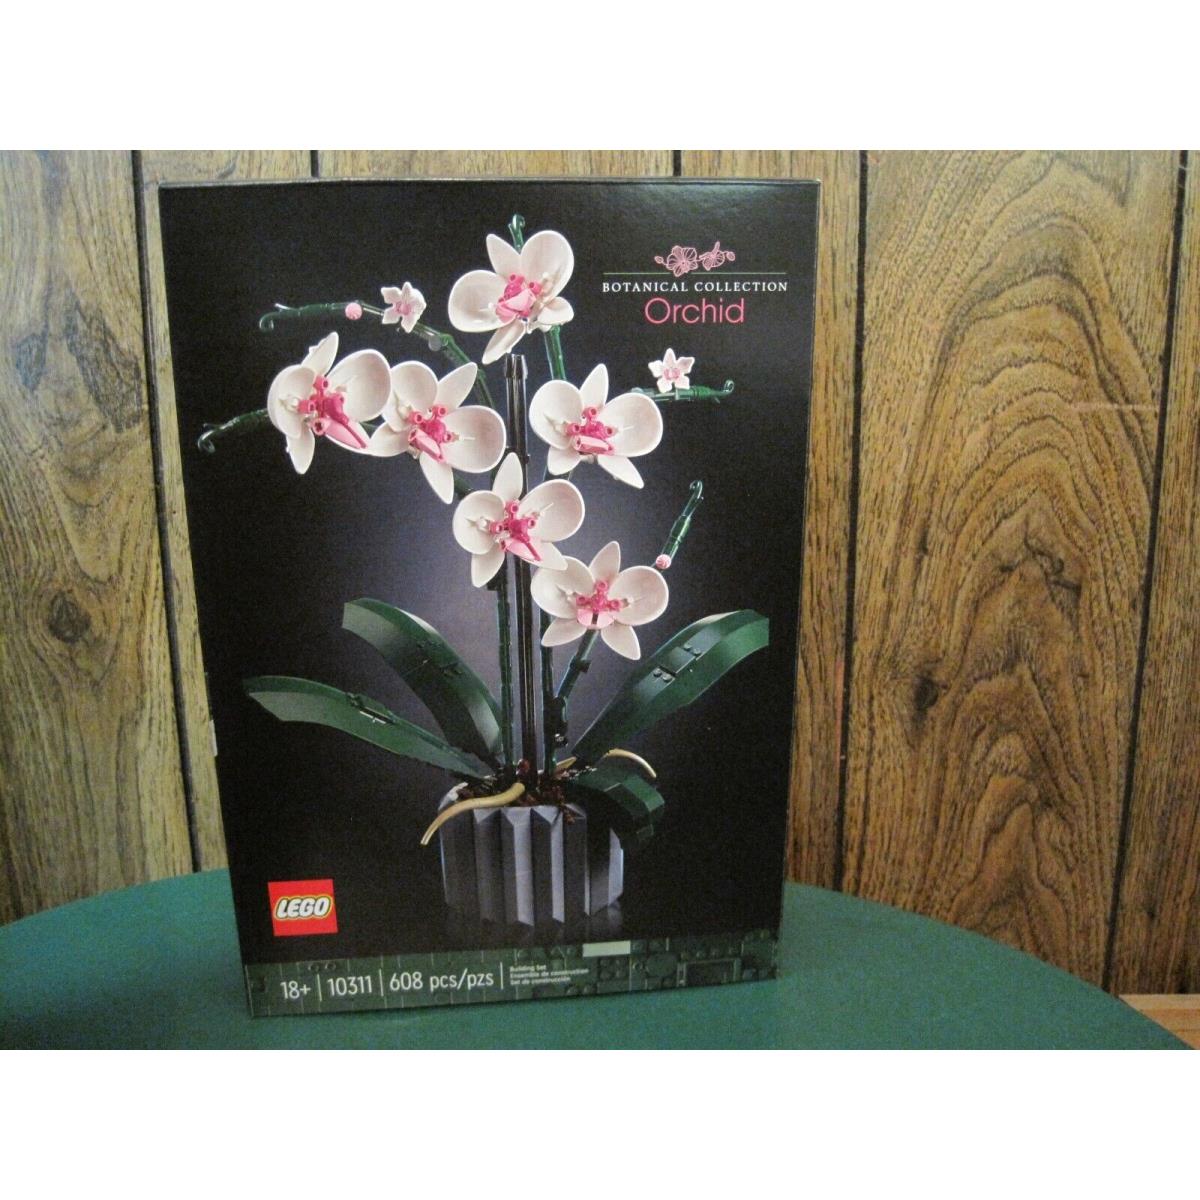 2022 Lego 10311 Botanical Collection Orchid 608 Pieces